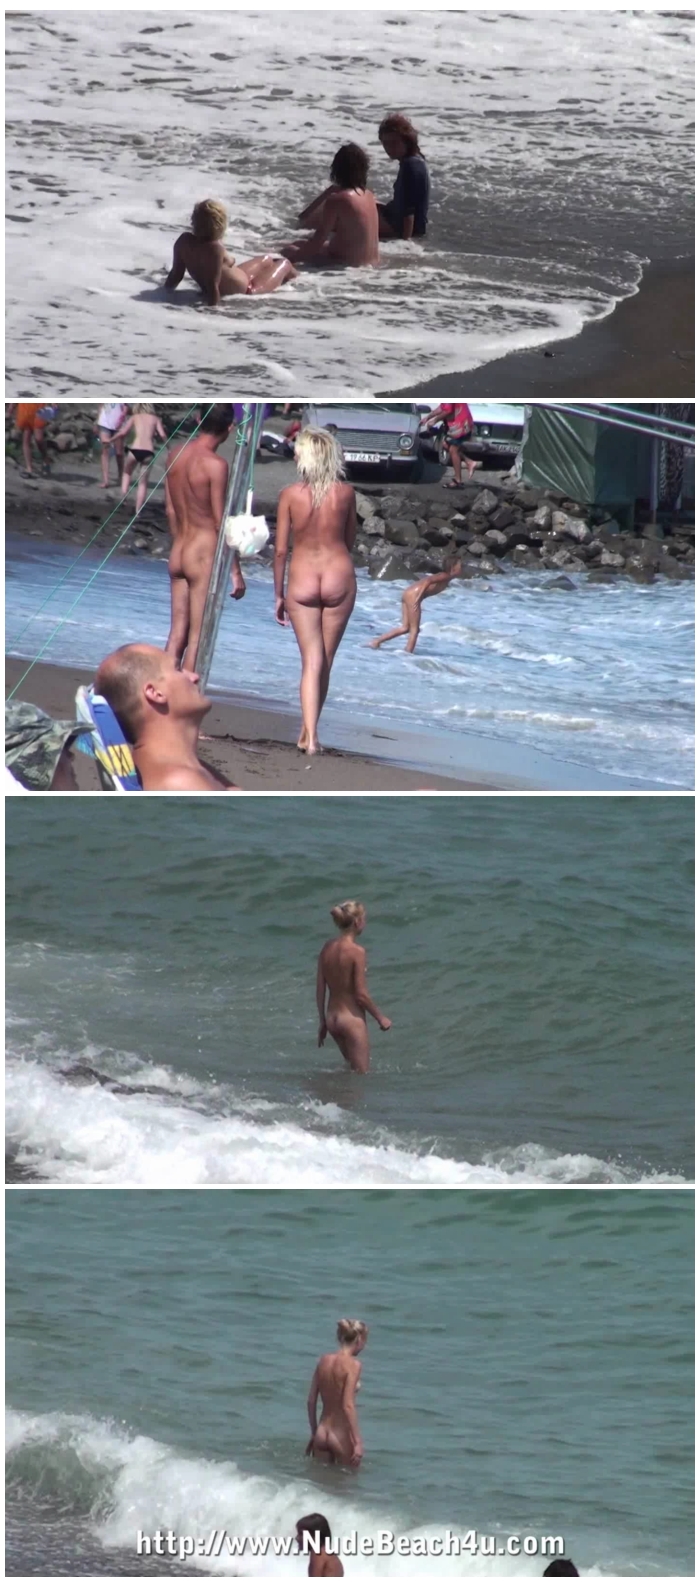 Nude Beach for You - voyeur adult Page 62 Sex-Forum image picture